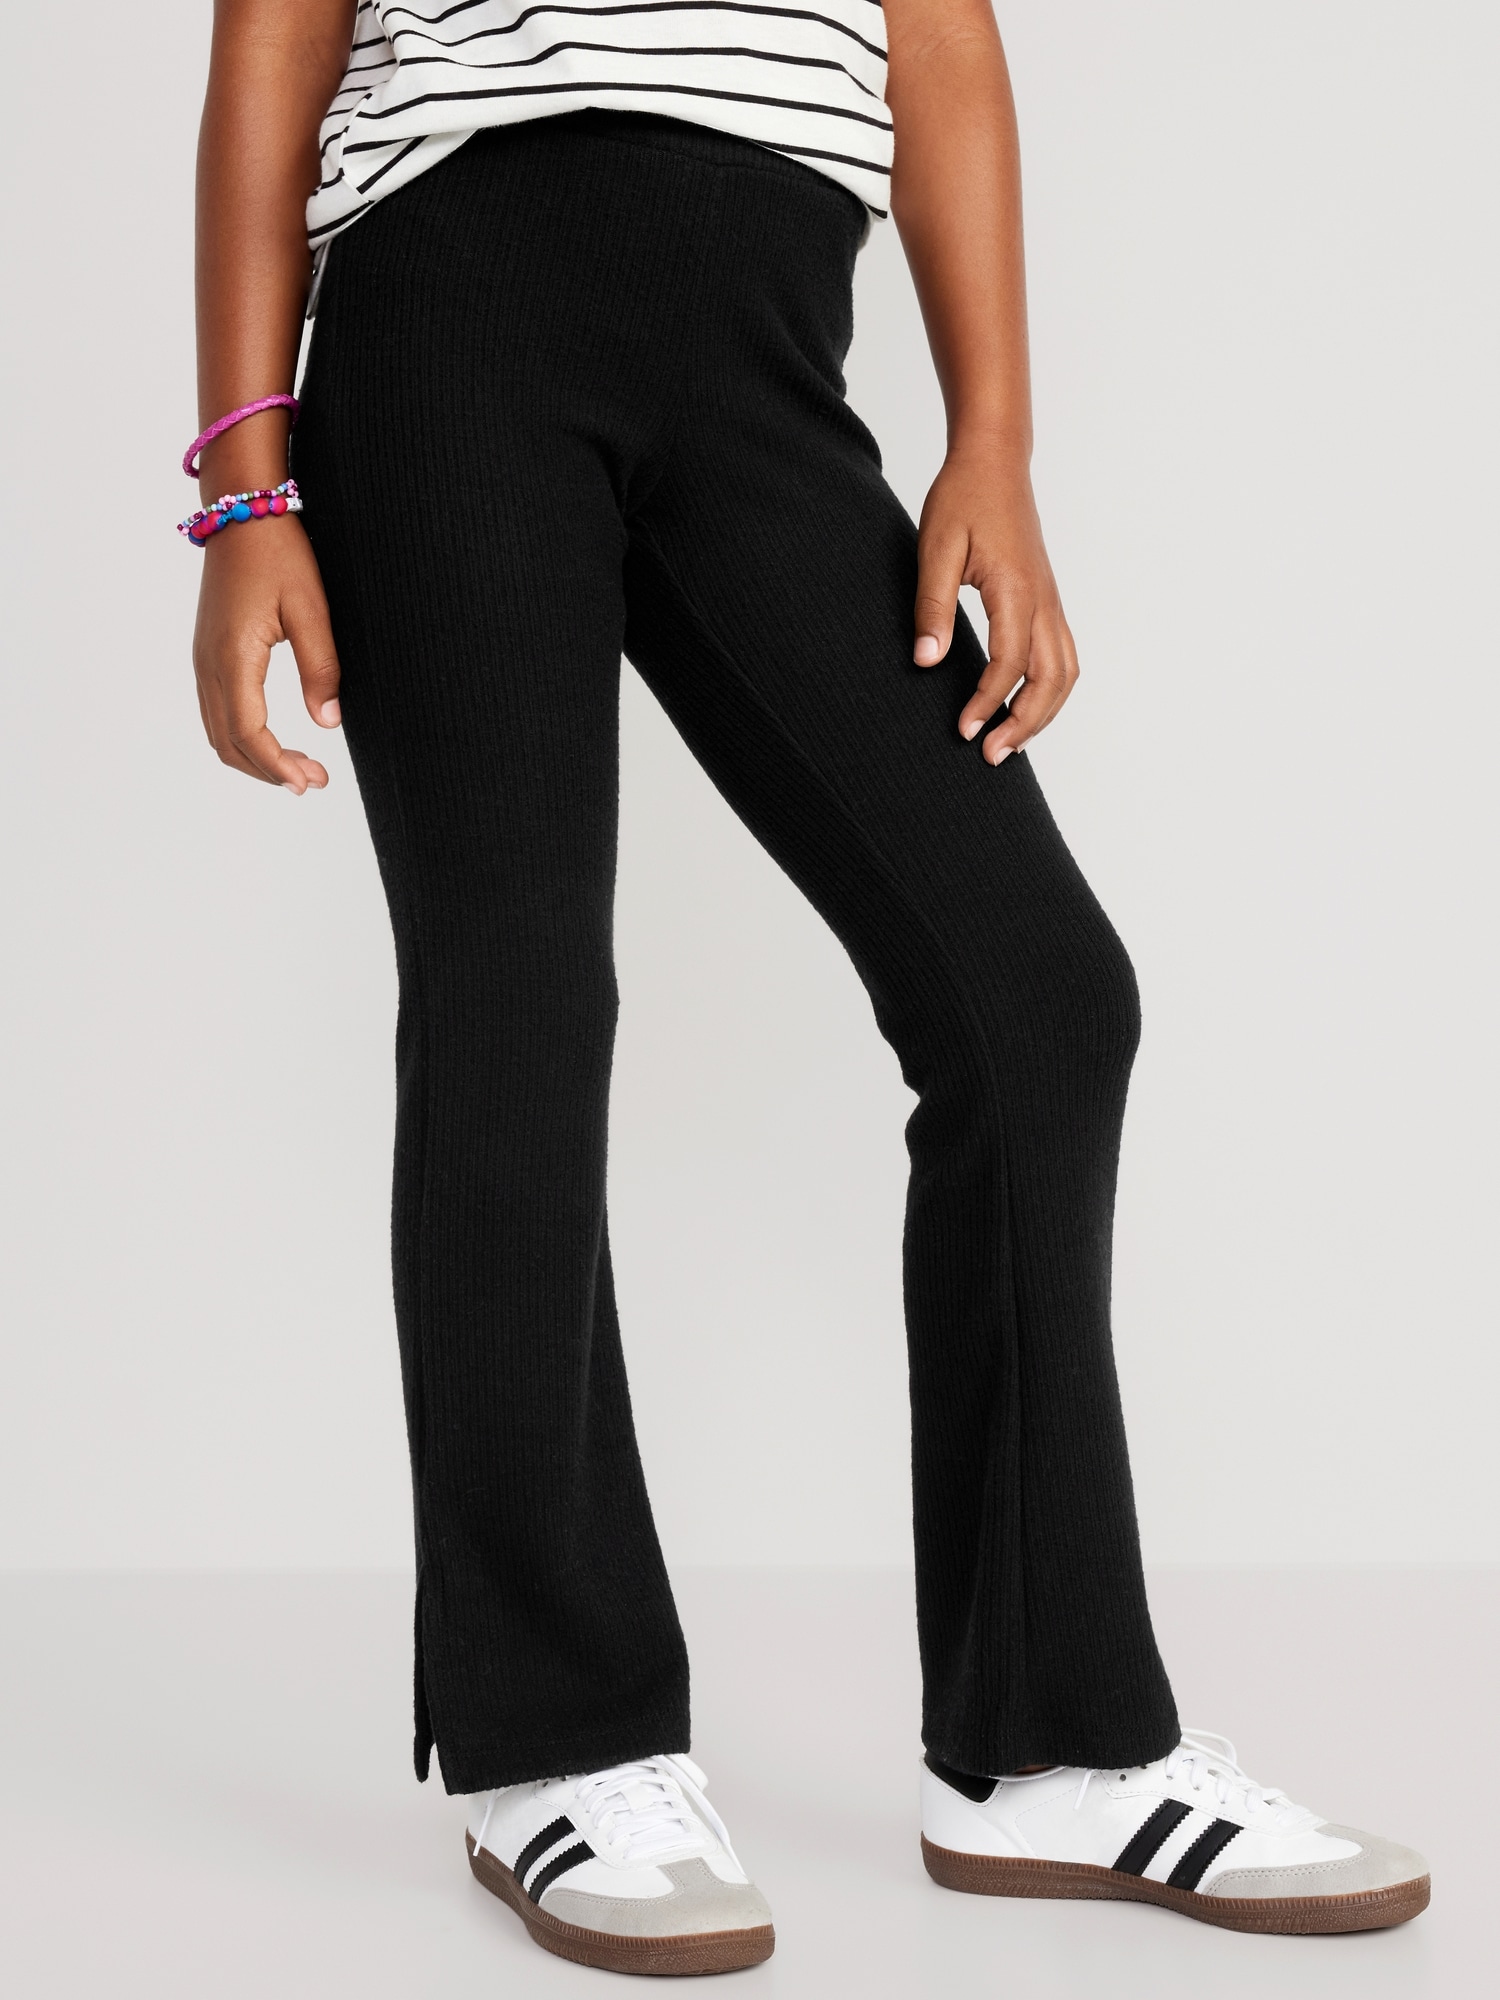 Flared Pants For Girls